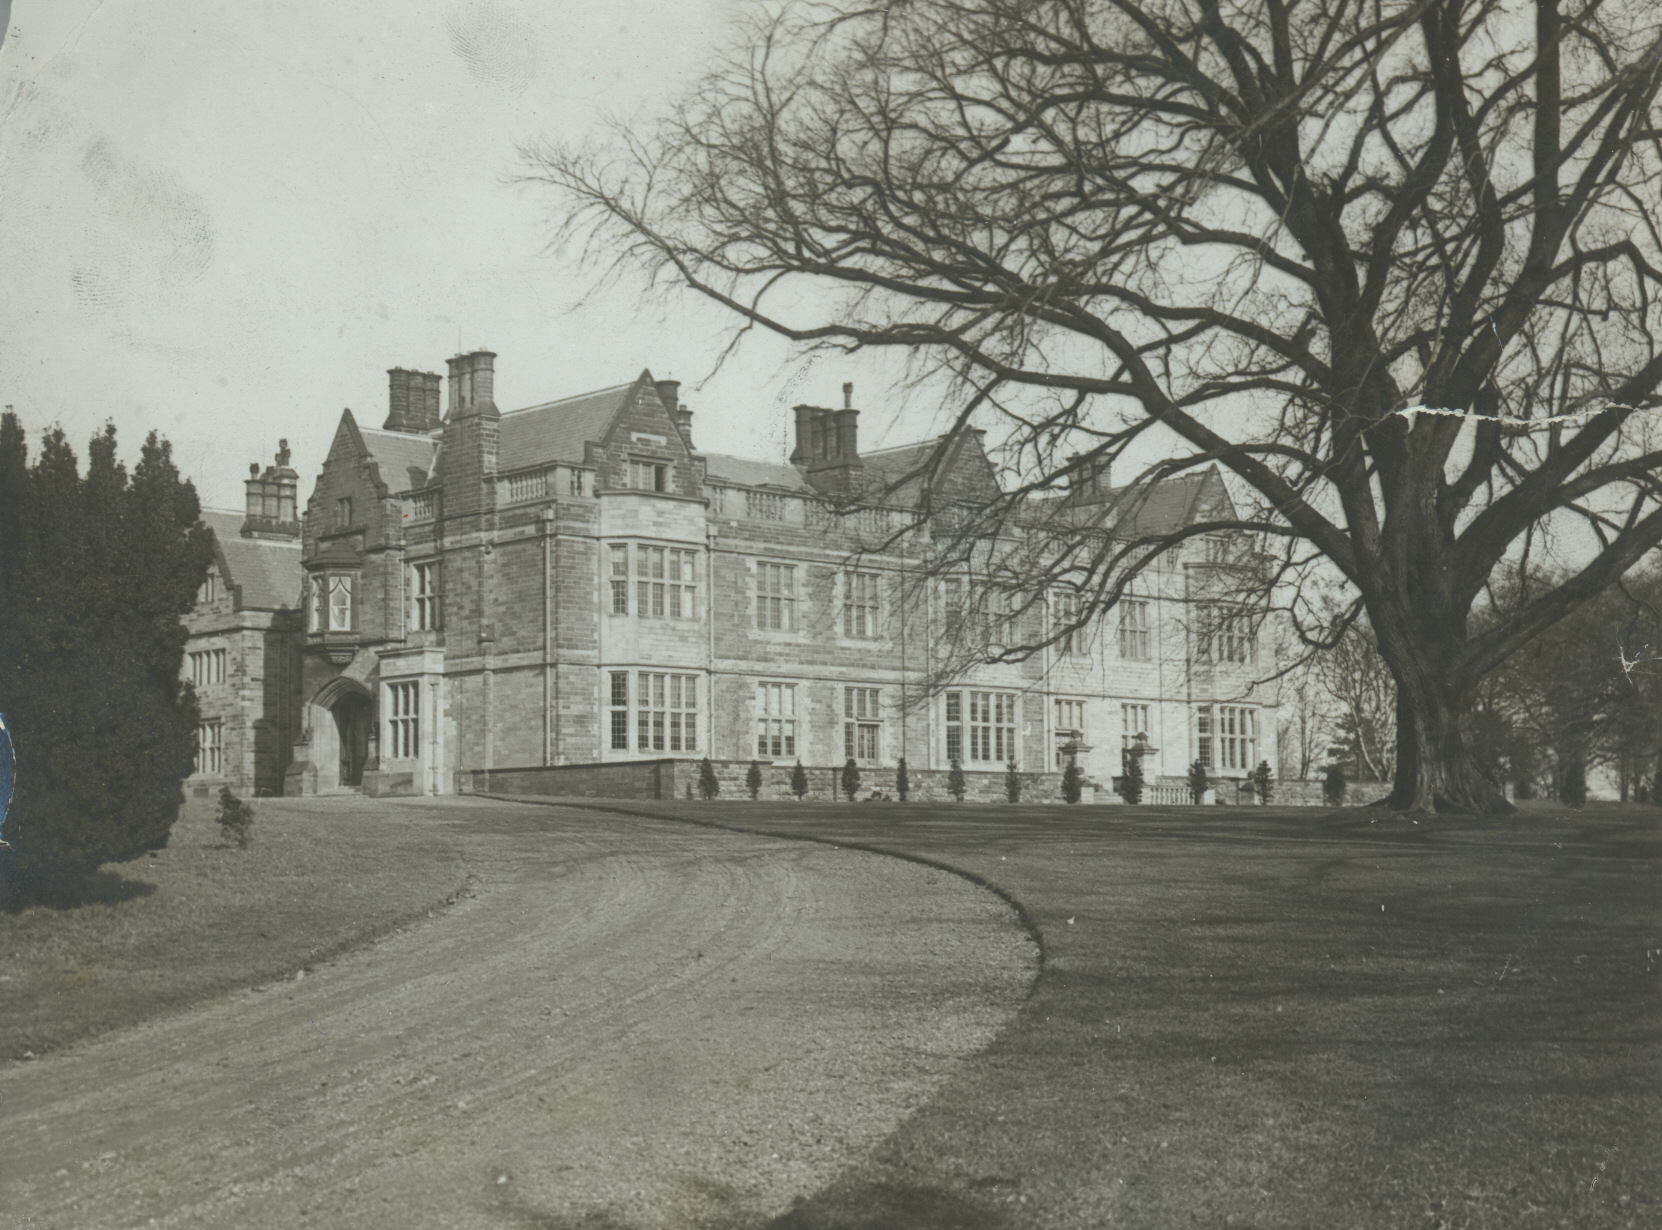 Gisborough Hall in 1966: it has at least three ghosts